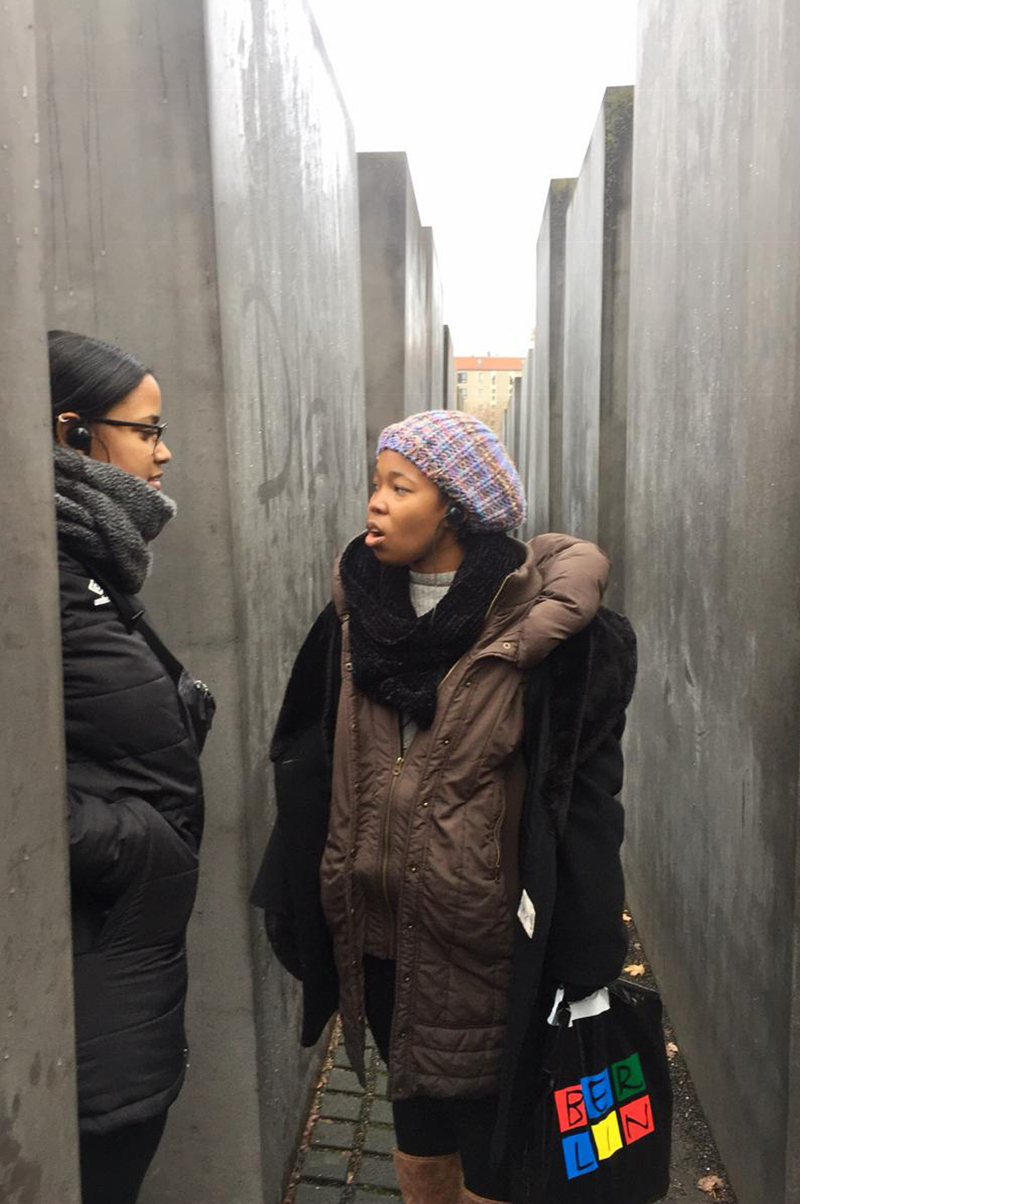 Two students in the midst of the Memorial to the Murdered Jews of Europe, Berlin.